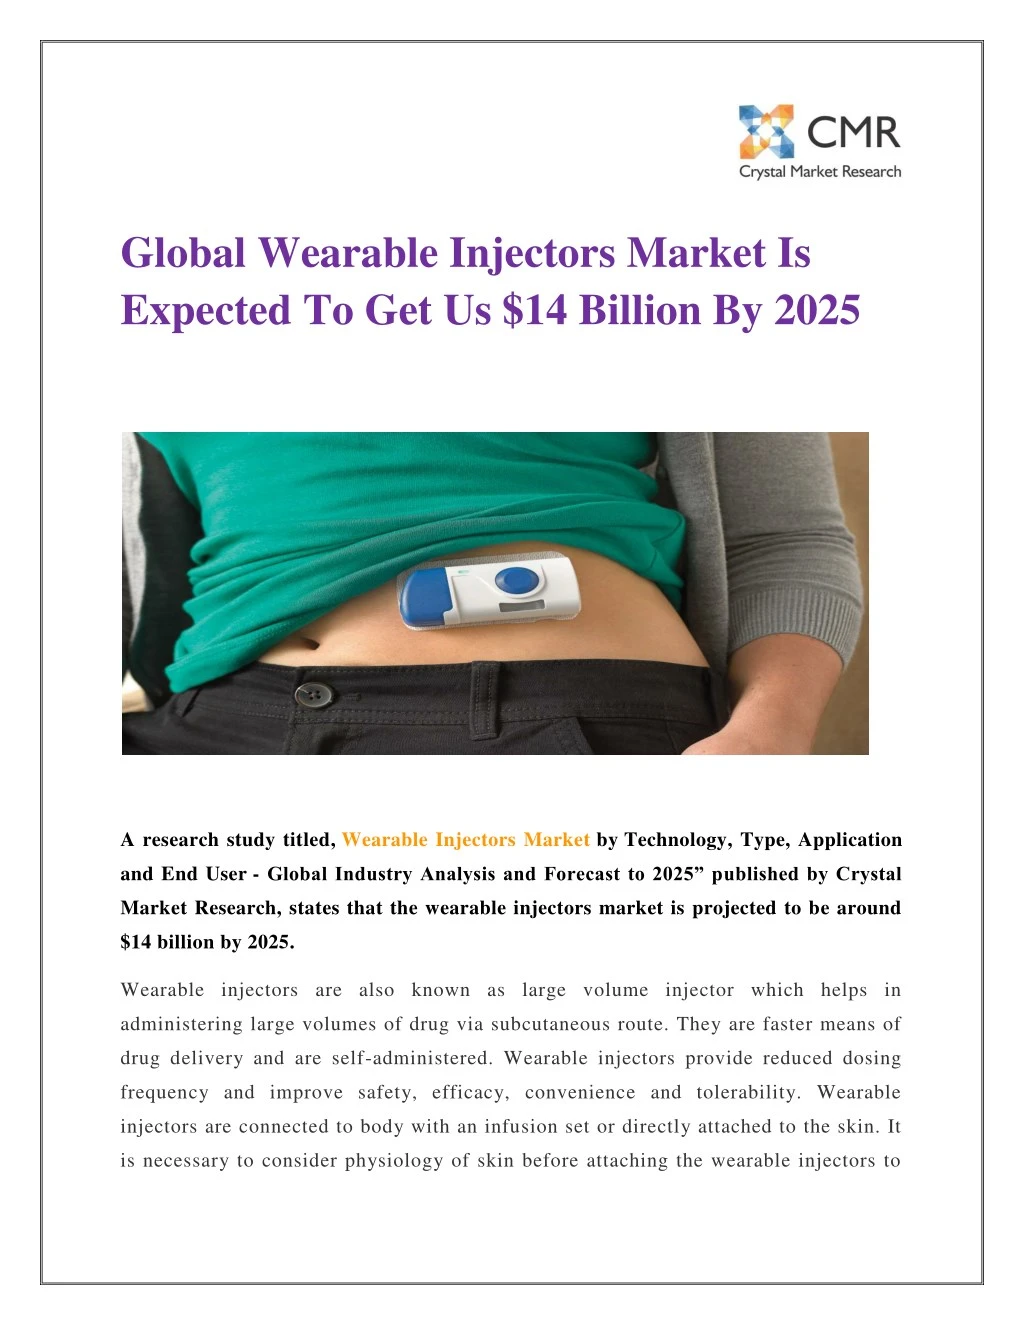 global wearable injectors market is expected